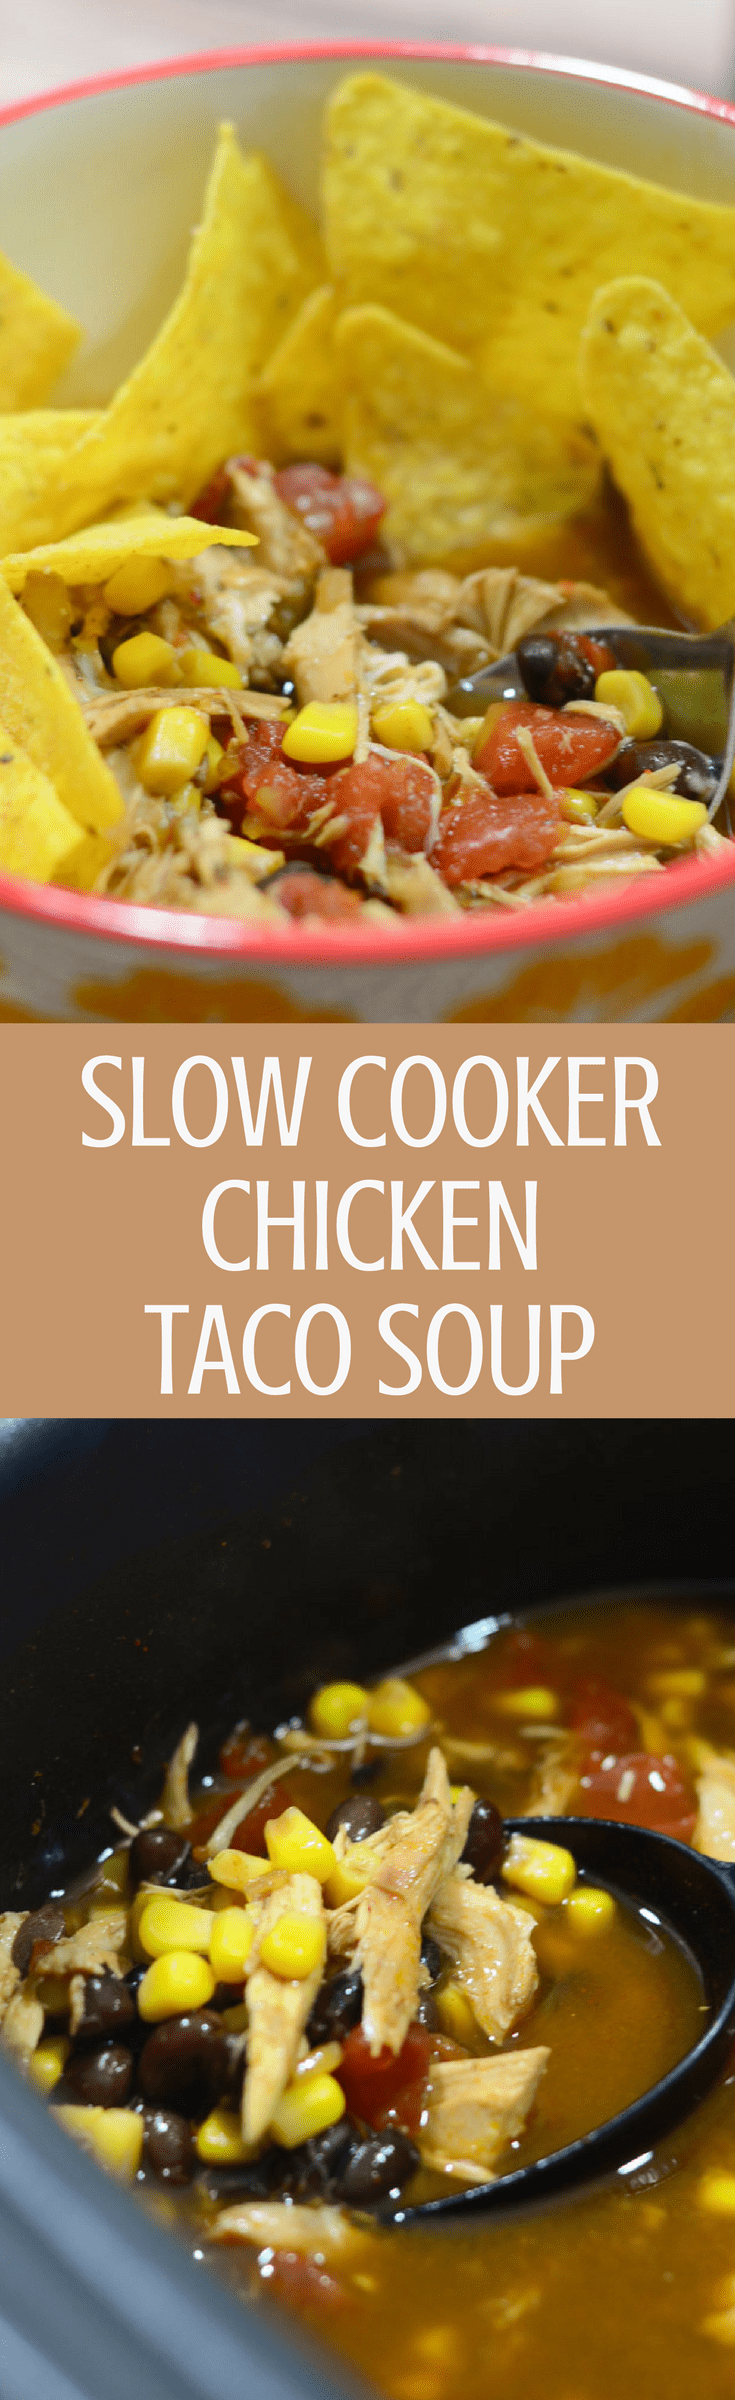 Slow Cooker Chicken Taco Soup - Mommy Hates Cooking